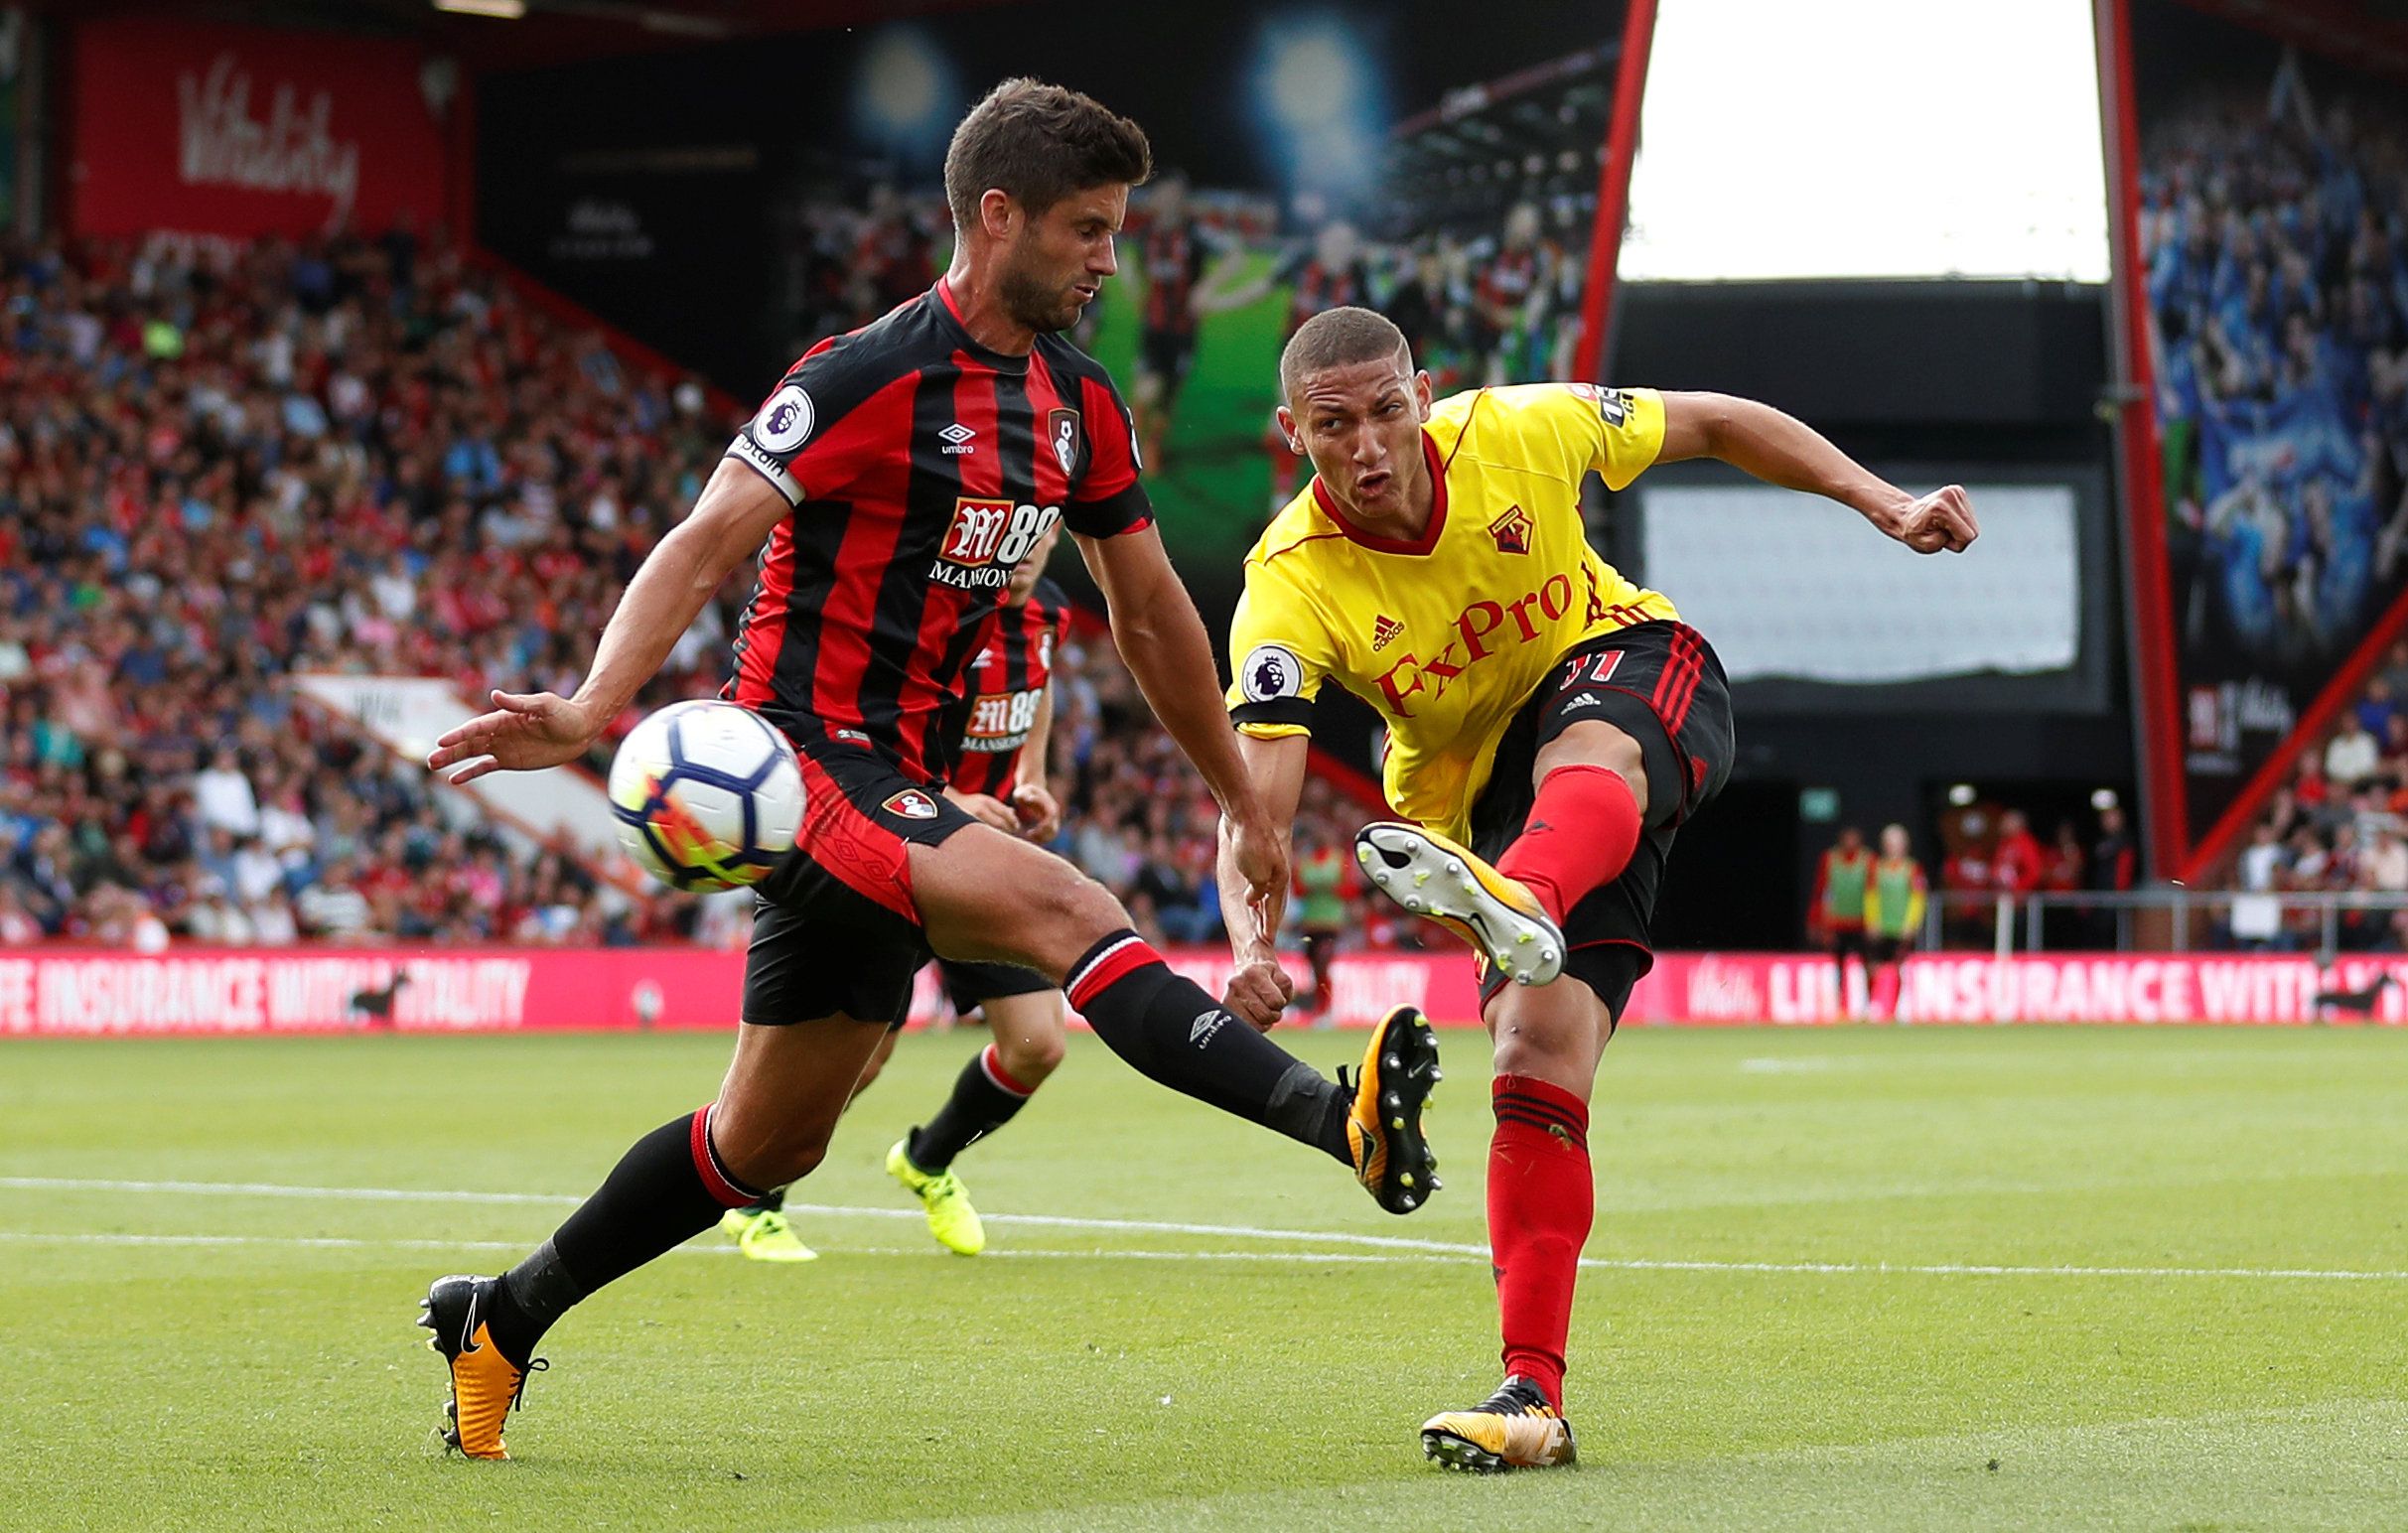 Football Soccer - Premier League - AFC Bournemouth vs Watford - Bournemouth, Britain - August 19, 2017   Watford's Richarlison in action with Bournemouth's Andrew Surman    Action Images via Reuters/Matthew Childs     EDITORIAL USE ONLY. No use with unauthorized audio, video, data, fixture lists, club/league logos or 